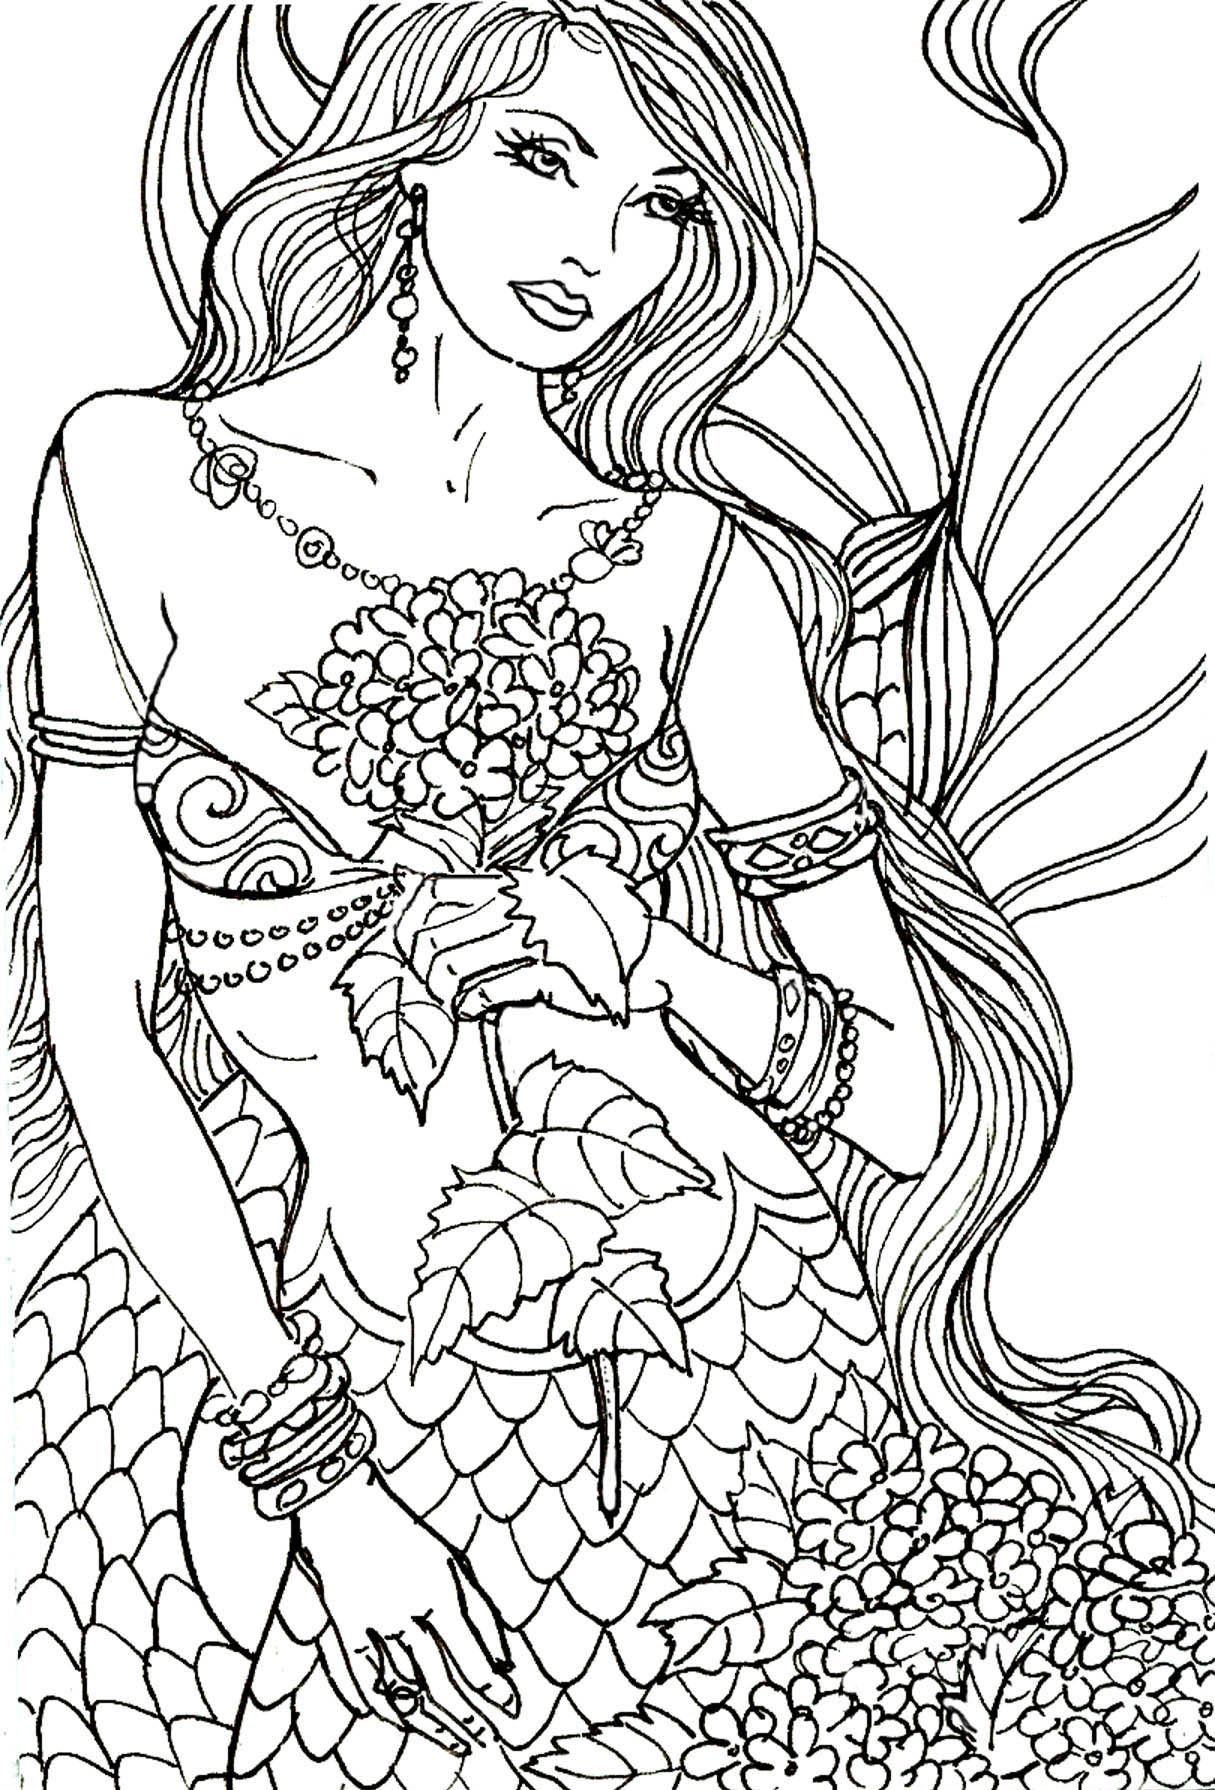 Download Mermaid Coloring Pages For Adults Best Coloring Pages For Kids